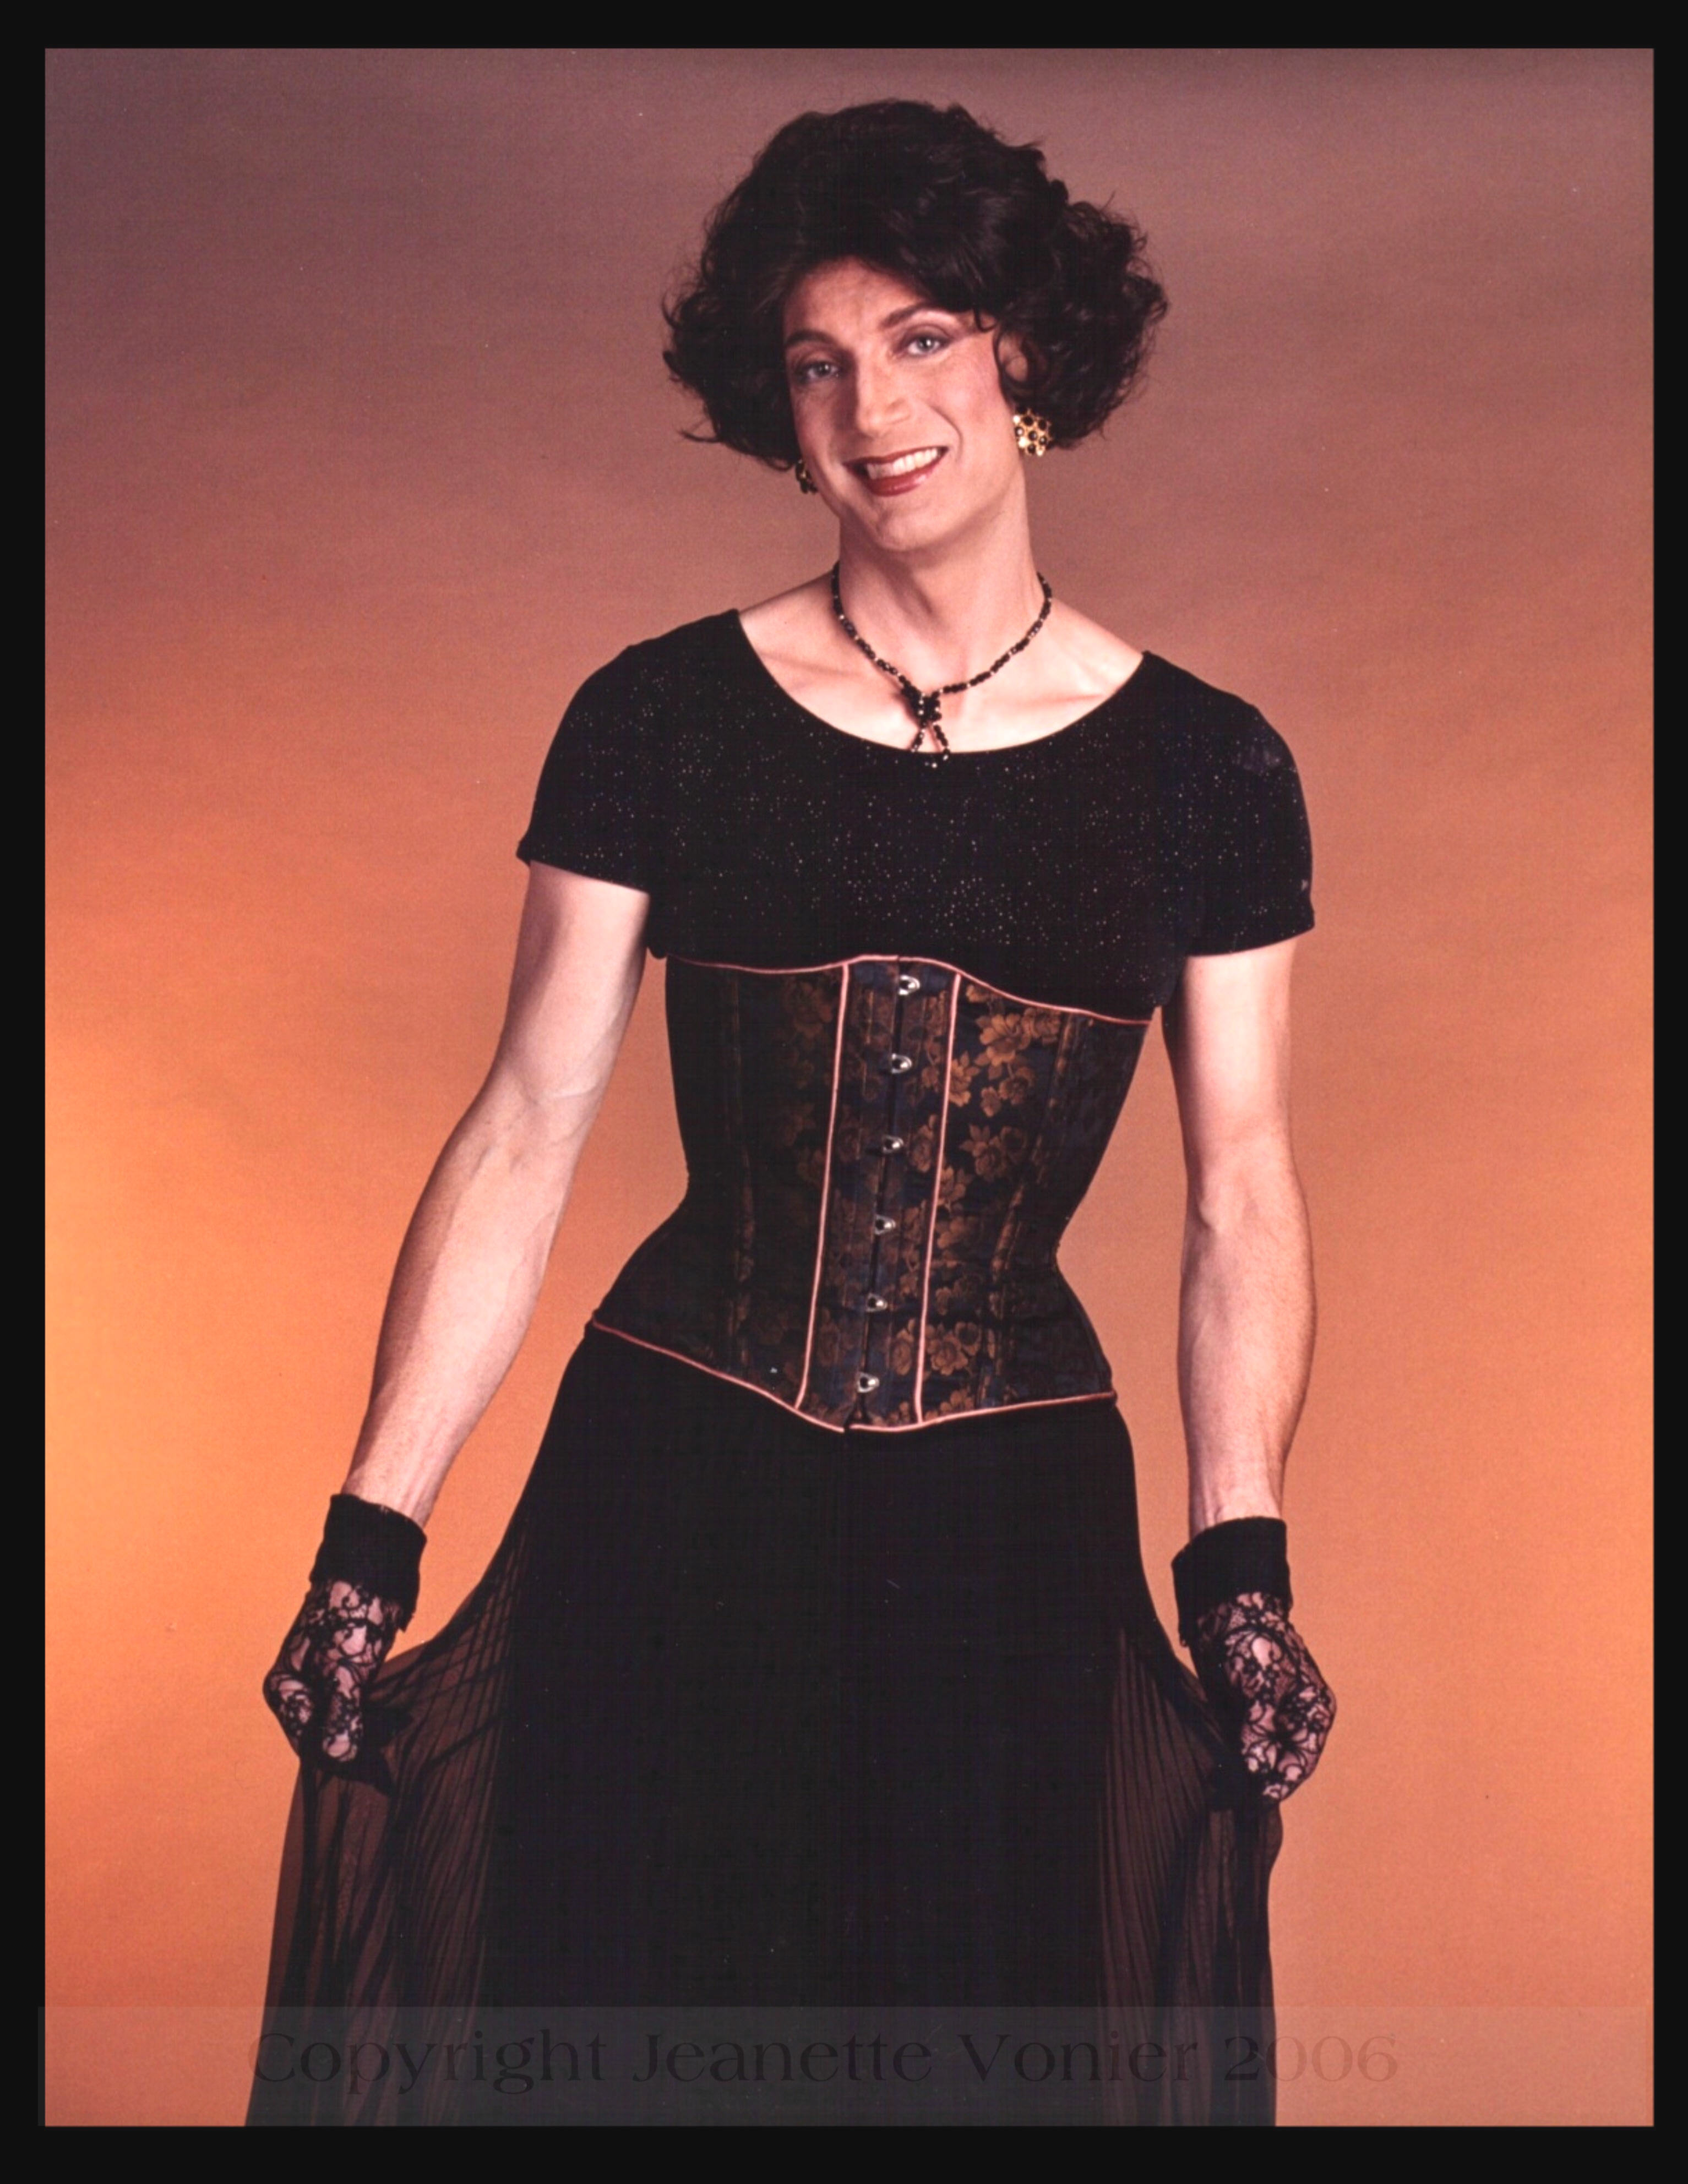 Transgendered Corsetry and Waist Training